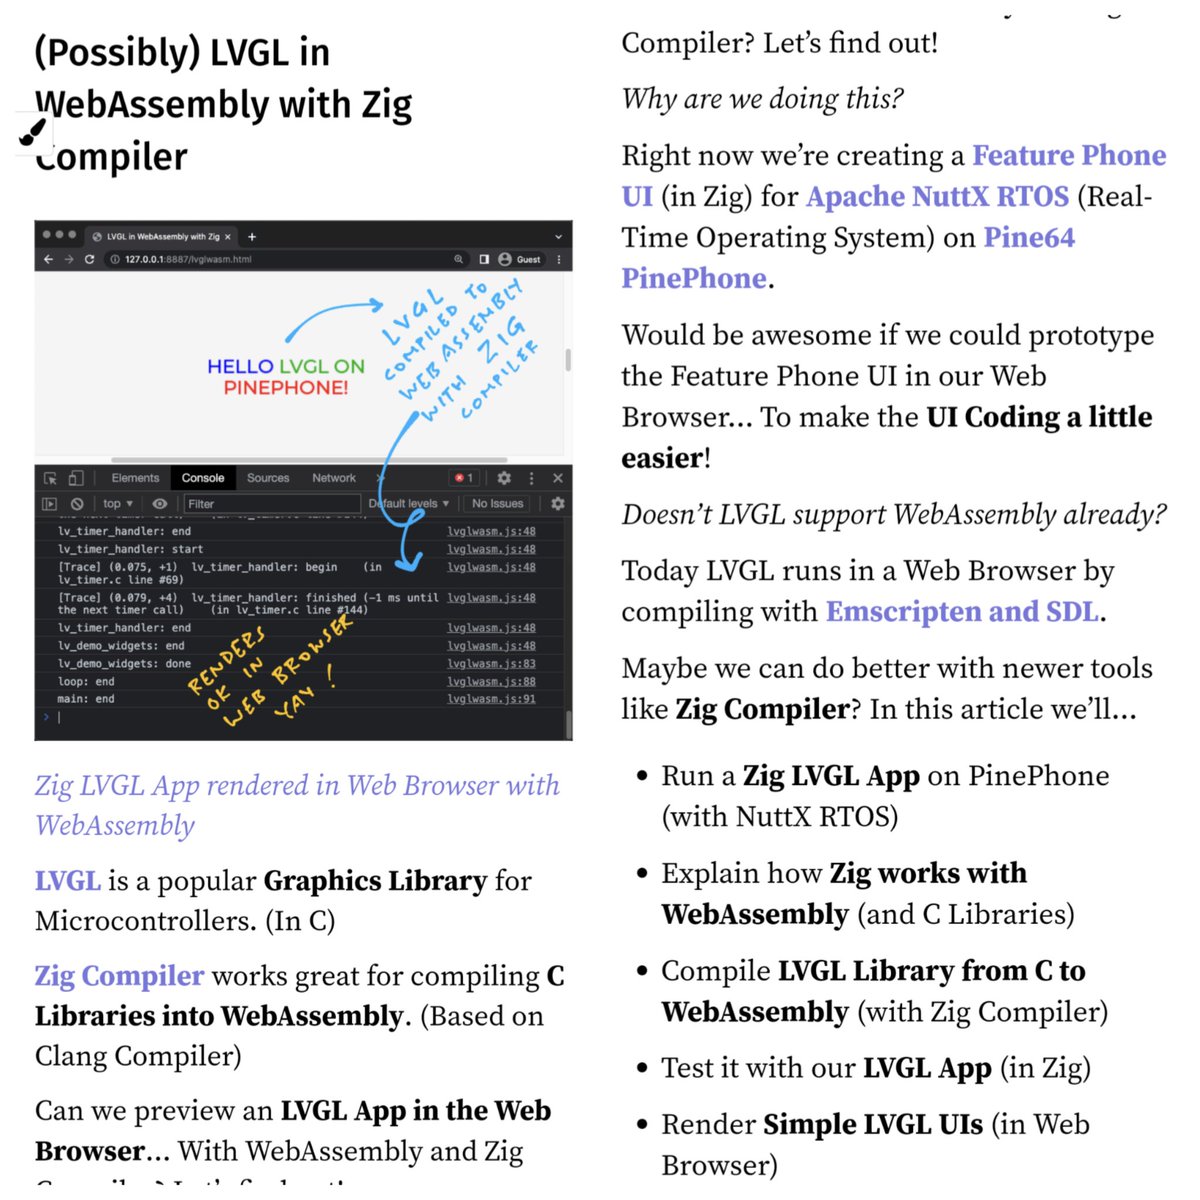 Will #LVGL Graphical Apps run in the Web Browser ... With #WebAssembly and #ZigLang Compiler? Let's find out!

Article: lupyuen.codeberg.page/articles/lvgl3…